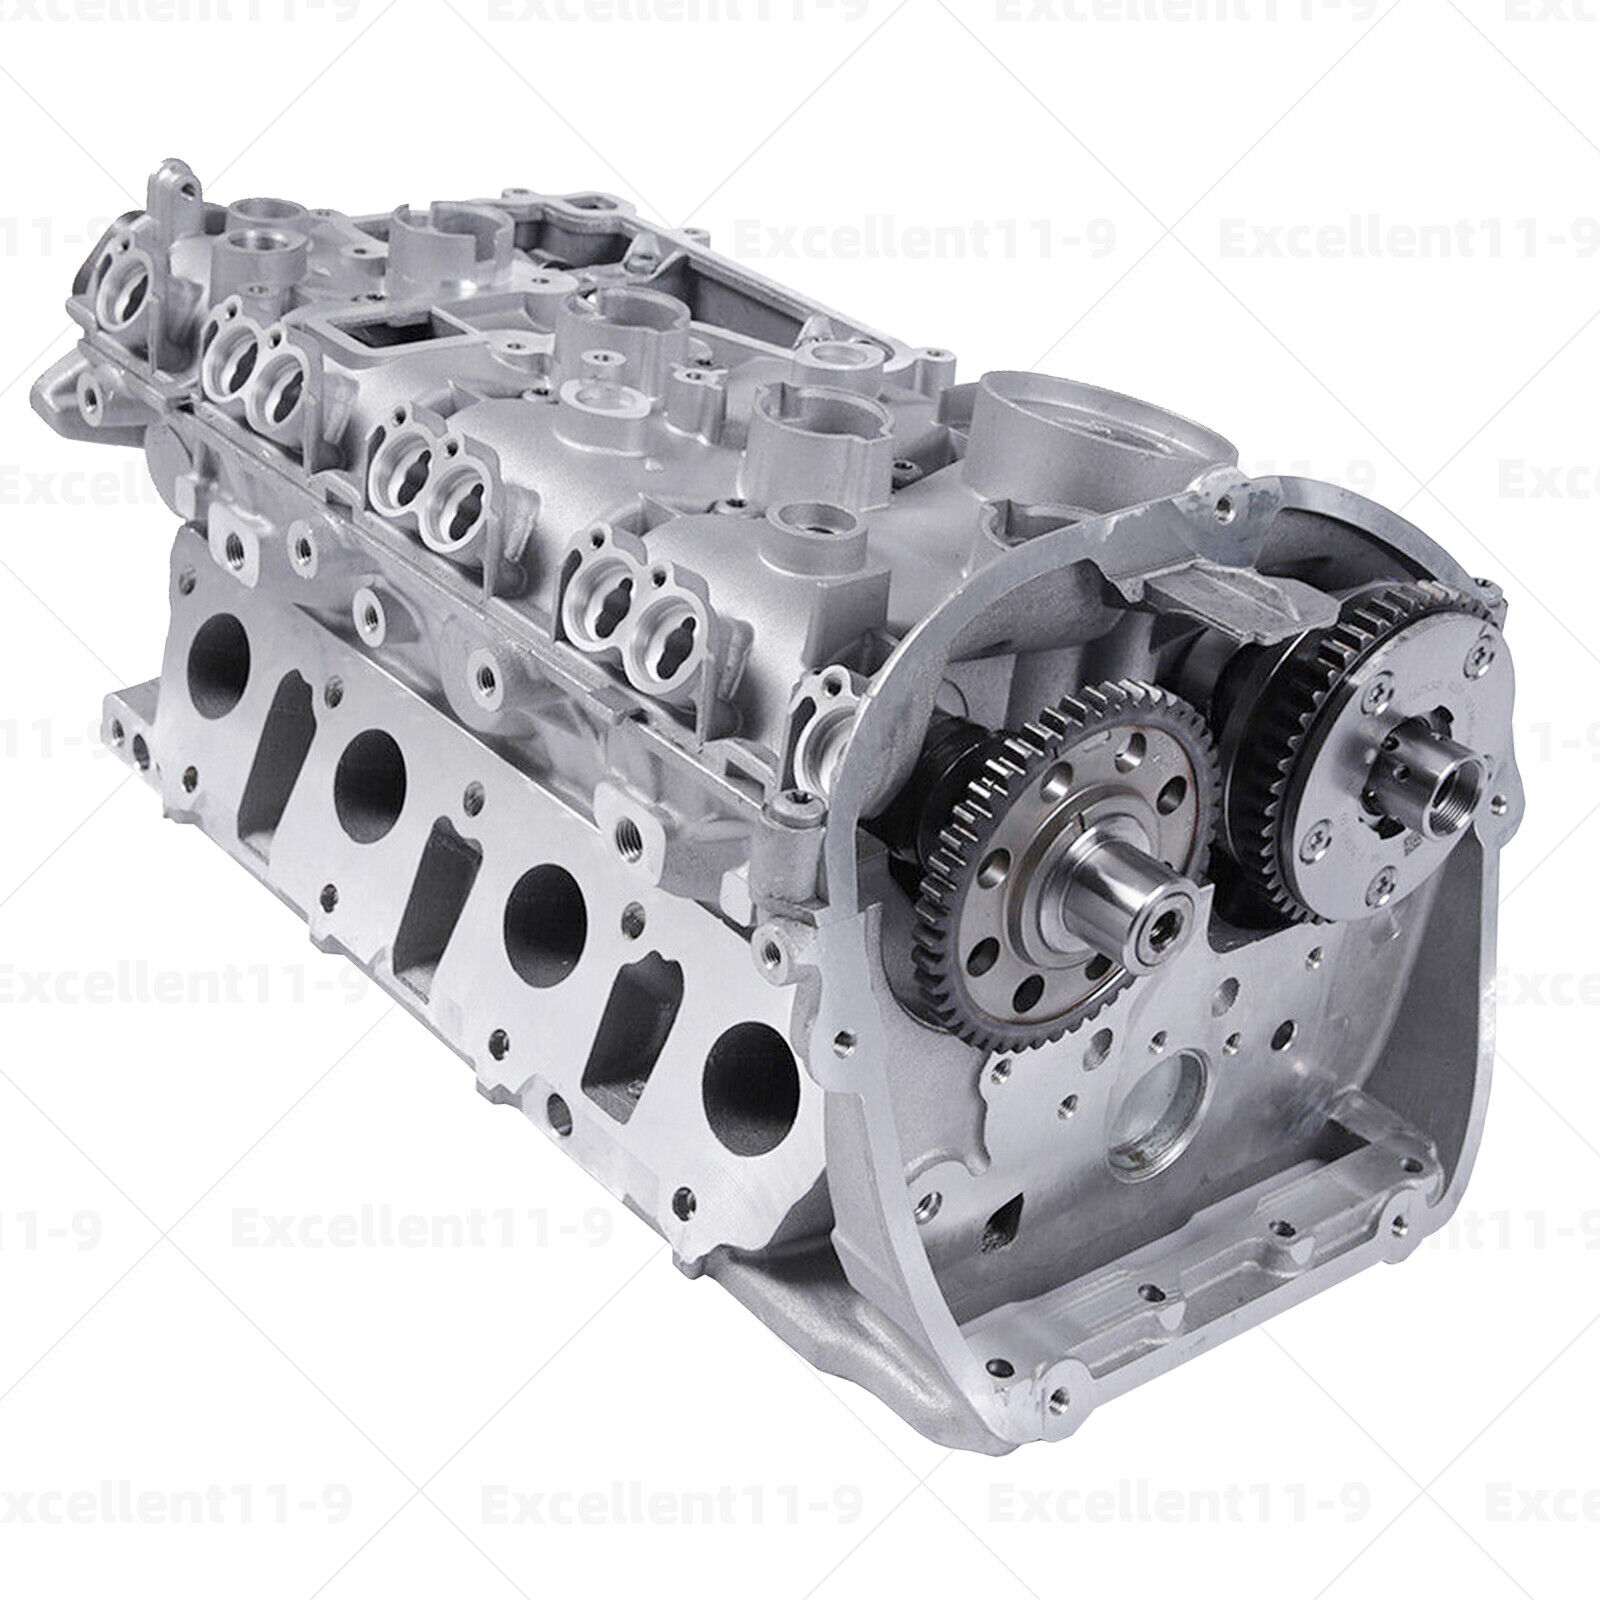 For AUDI A4 A5 A6 A8 Q5 Cylinder Head Assembly With Camshaft CAEB CDNC CAEB CAED